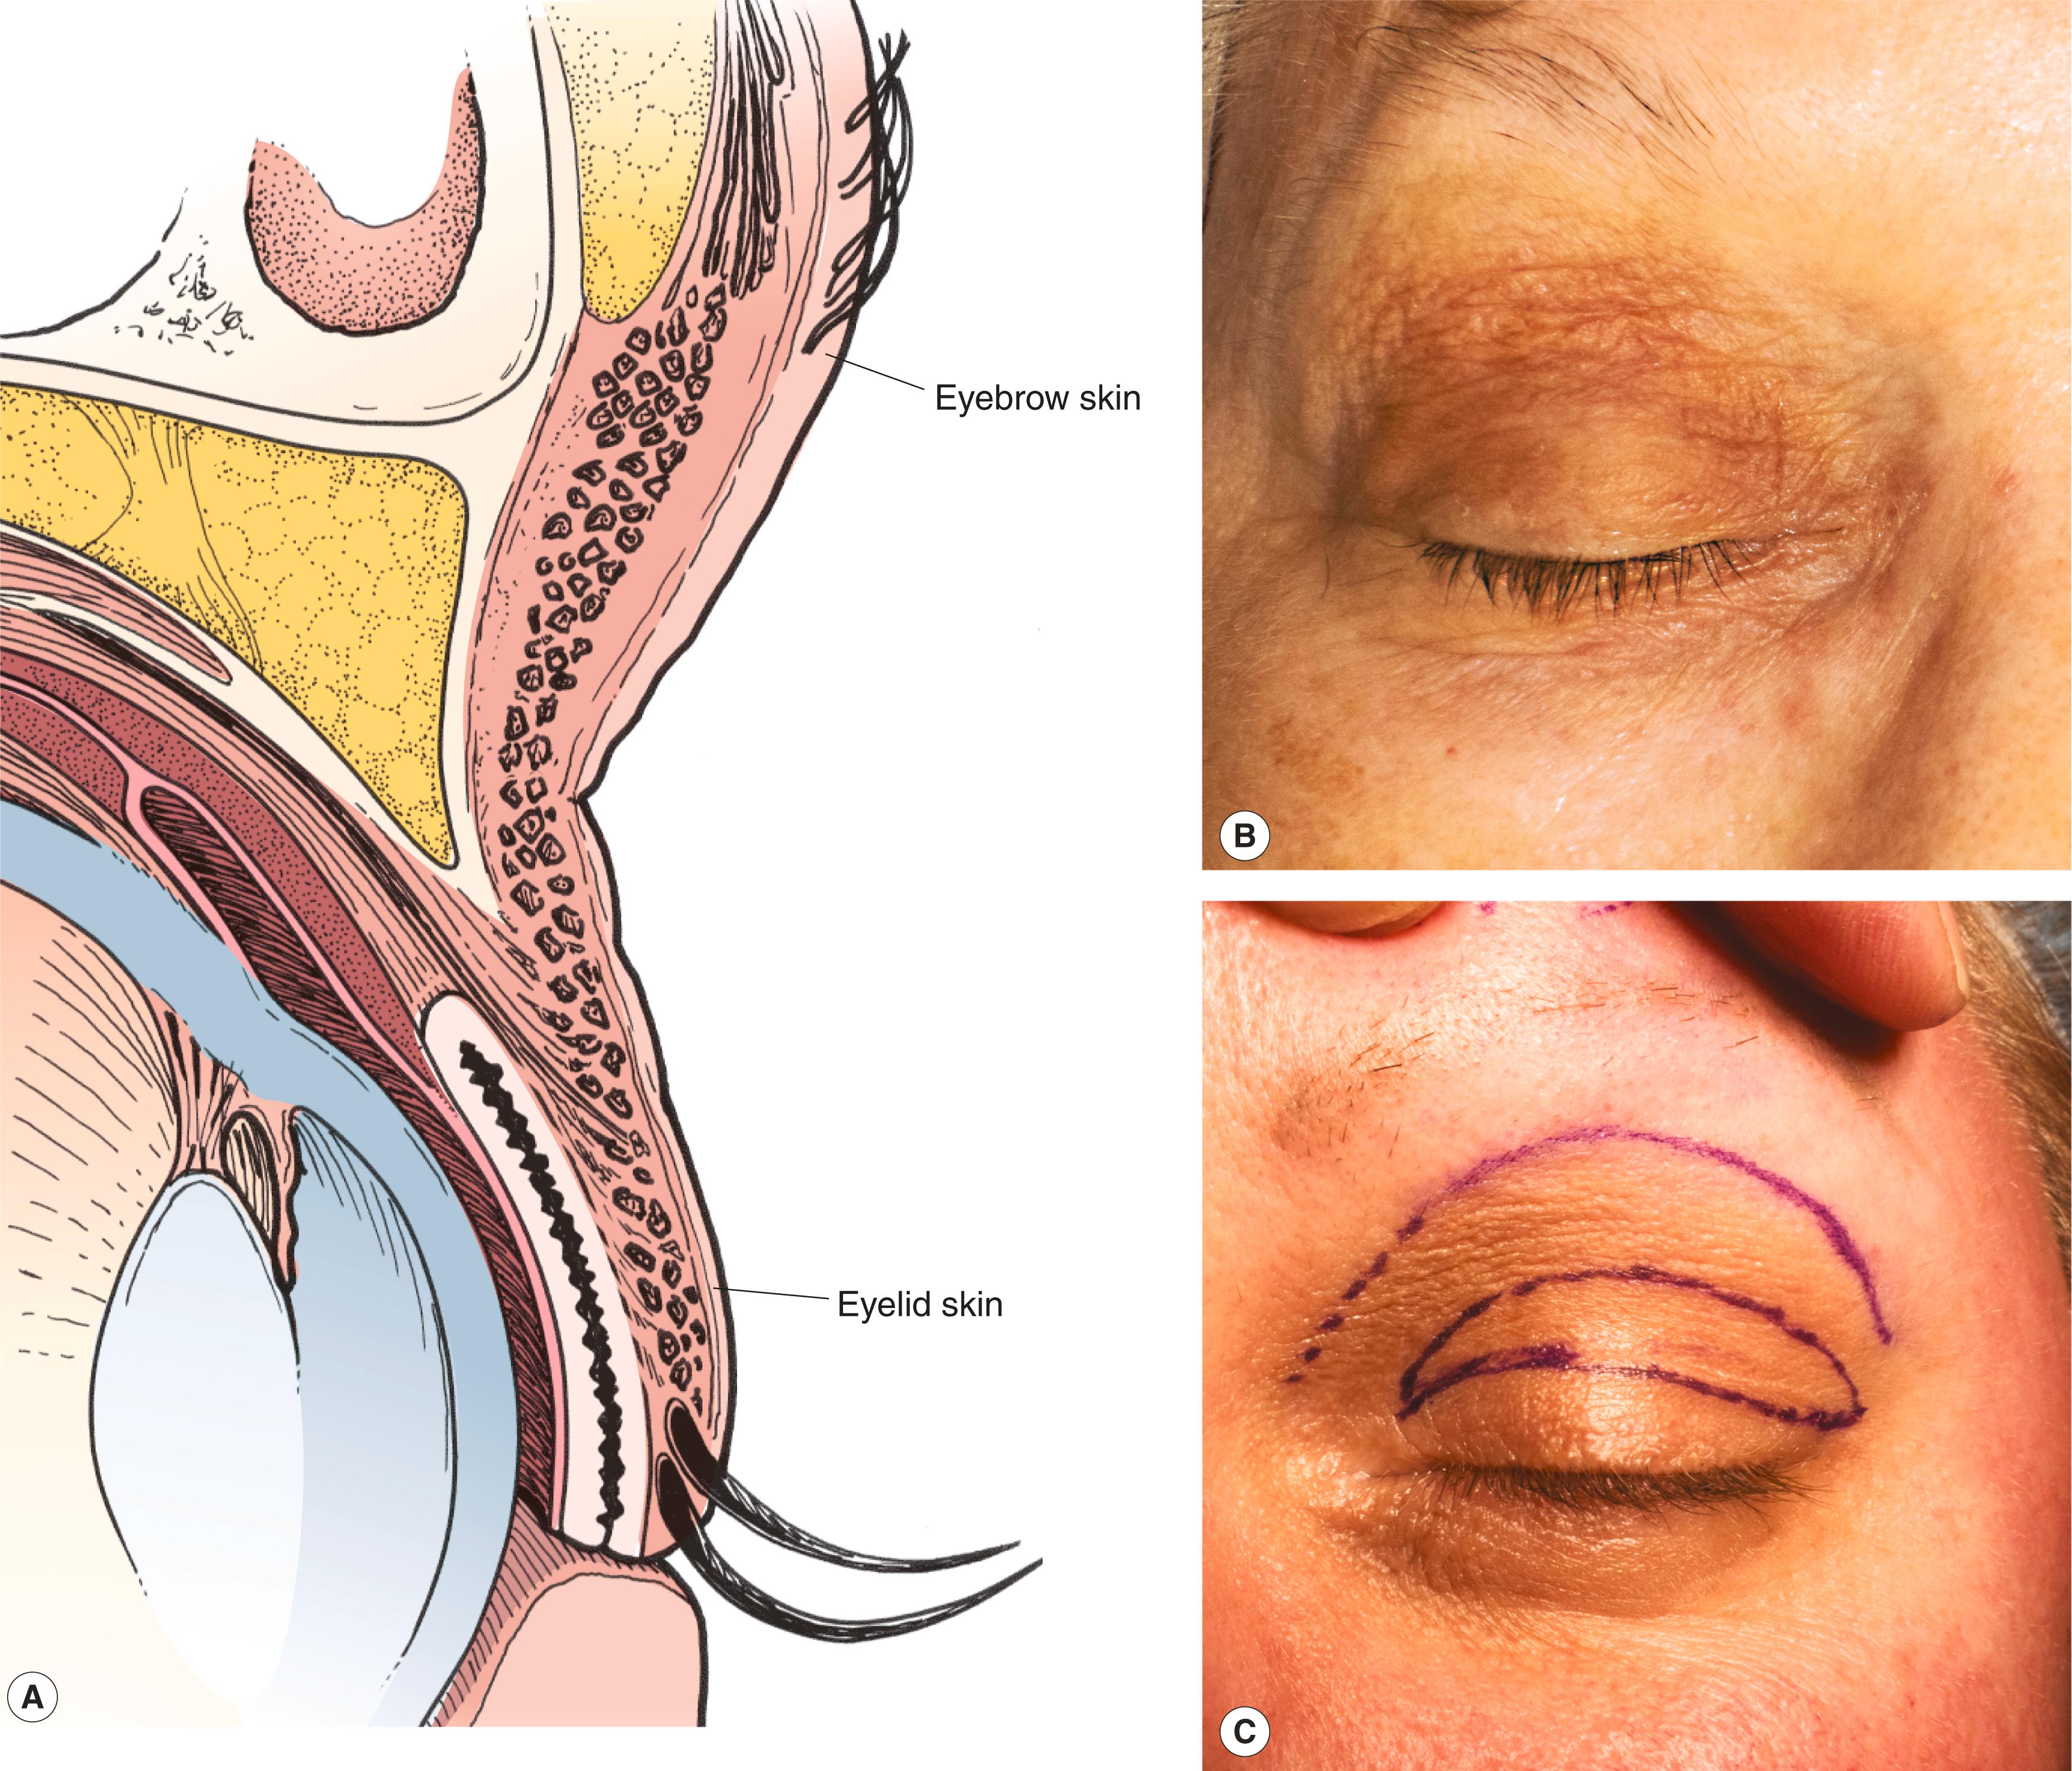 Figure 2.6, ( A ) Eyelid pigmentation, thickness, and texture. Eyebrow skin is thicker than eyelid skin, which is seen a few millimeters inferior to the eyebrow hairs. Often the eyelid skin is darker than the eyebrow skin. ( B ) In this patient, the eyelid skin is darker, thinner, and more wrinkled than the eyebrow skin. ( C ) In another patient, who is younger than the patient in panel A , the eyelid skin is also darker and thinner than the eyebrow skin. The eyelid shows few wrinkles. It is important to recognize this difference so you can better diagnose an eyebrow ptosis. At the time of blepharoplasty, it helps you avoid taking too much eyelid skin. The ellipse shows the amount of eyelid skin to be removed for a blepharoplasty. The upper line is the junction of the eyelid and eyebrow skin. Notice that the junction is several millimeters inferior to the eyebrow hairs.